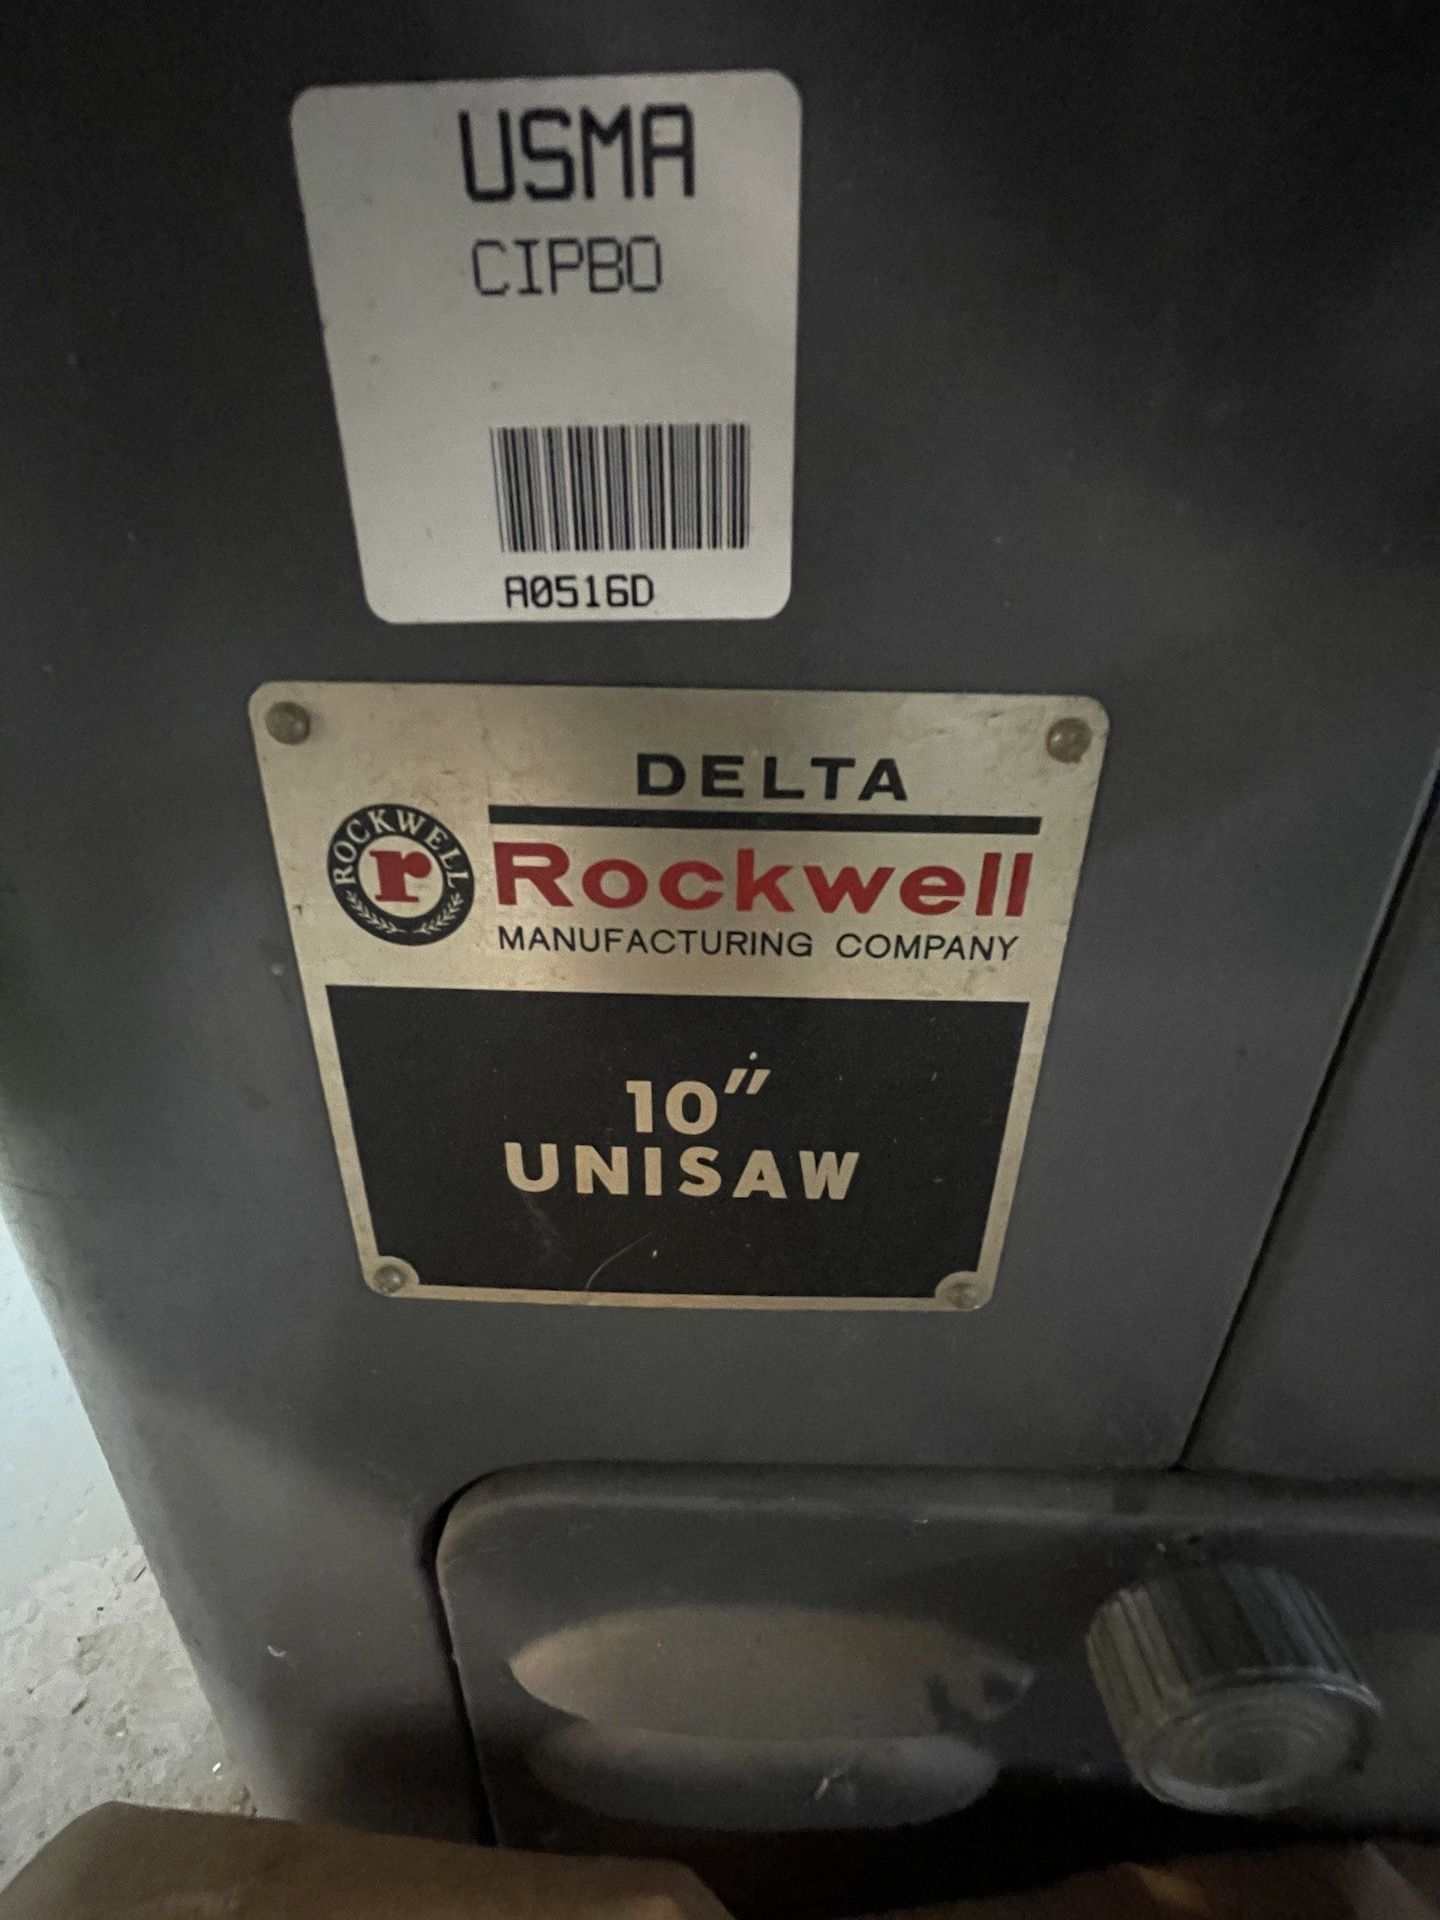 ROCKWELL 10" UNISAW, MODEL 34-450, S/N FR-8493, WITH BIESMEYER SAW FENCE SYSTEM (Non-Negotiable - Image 4 of 8